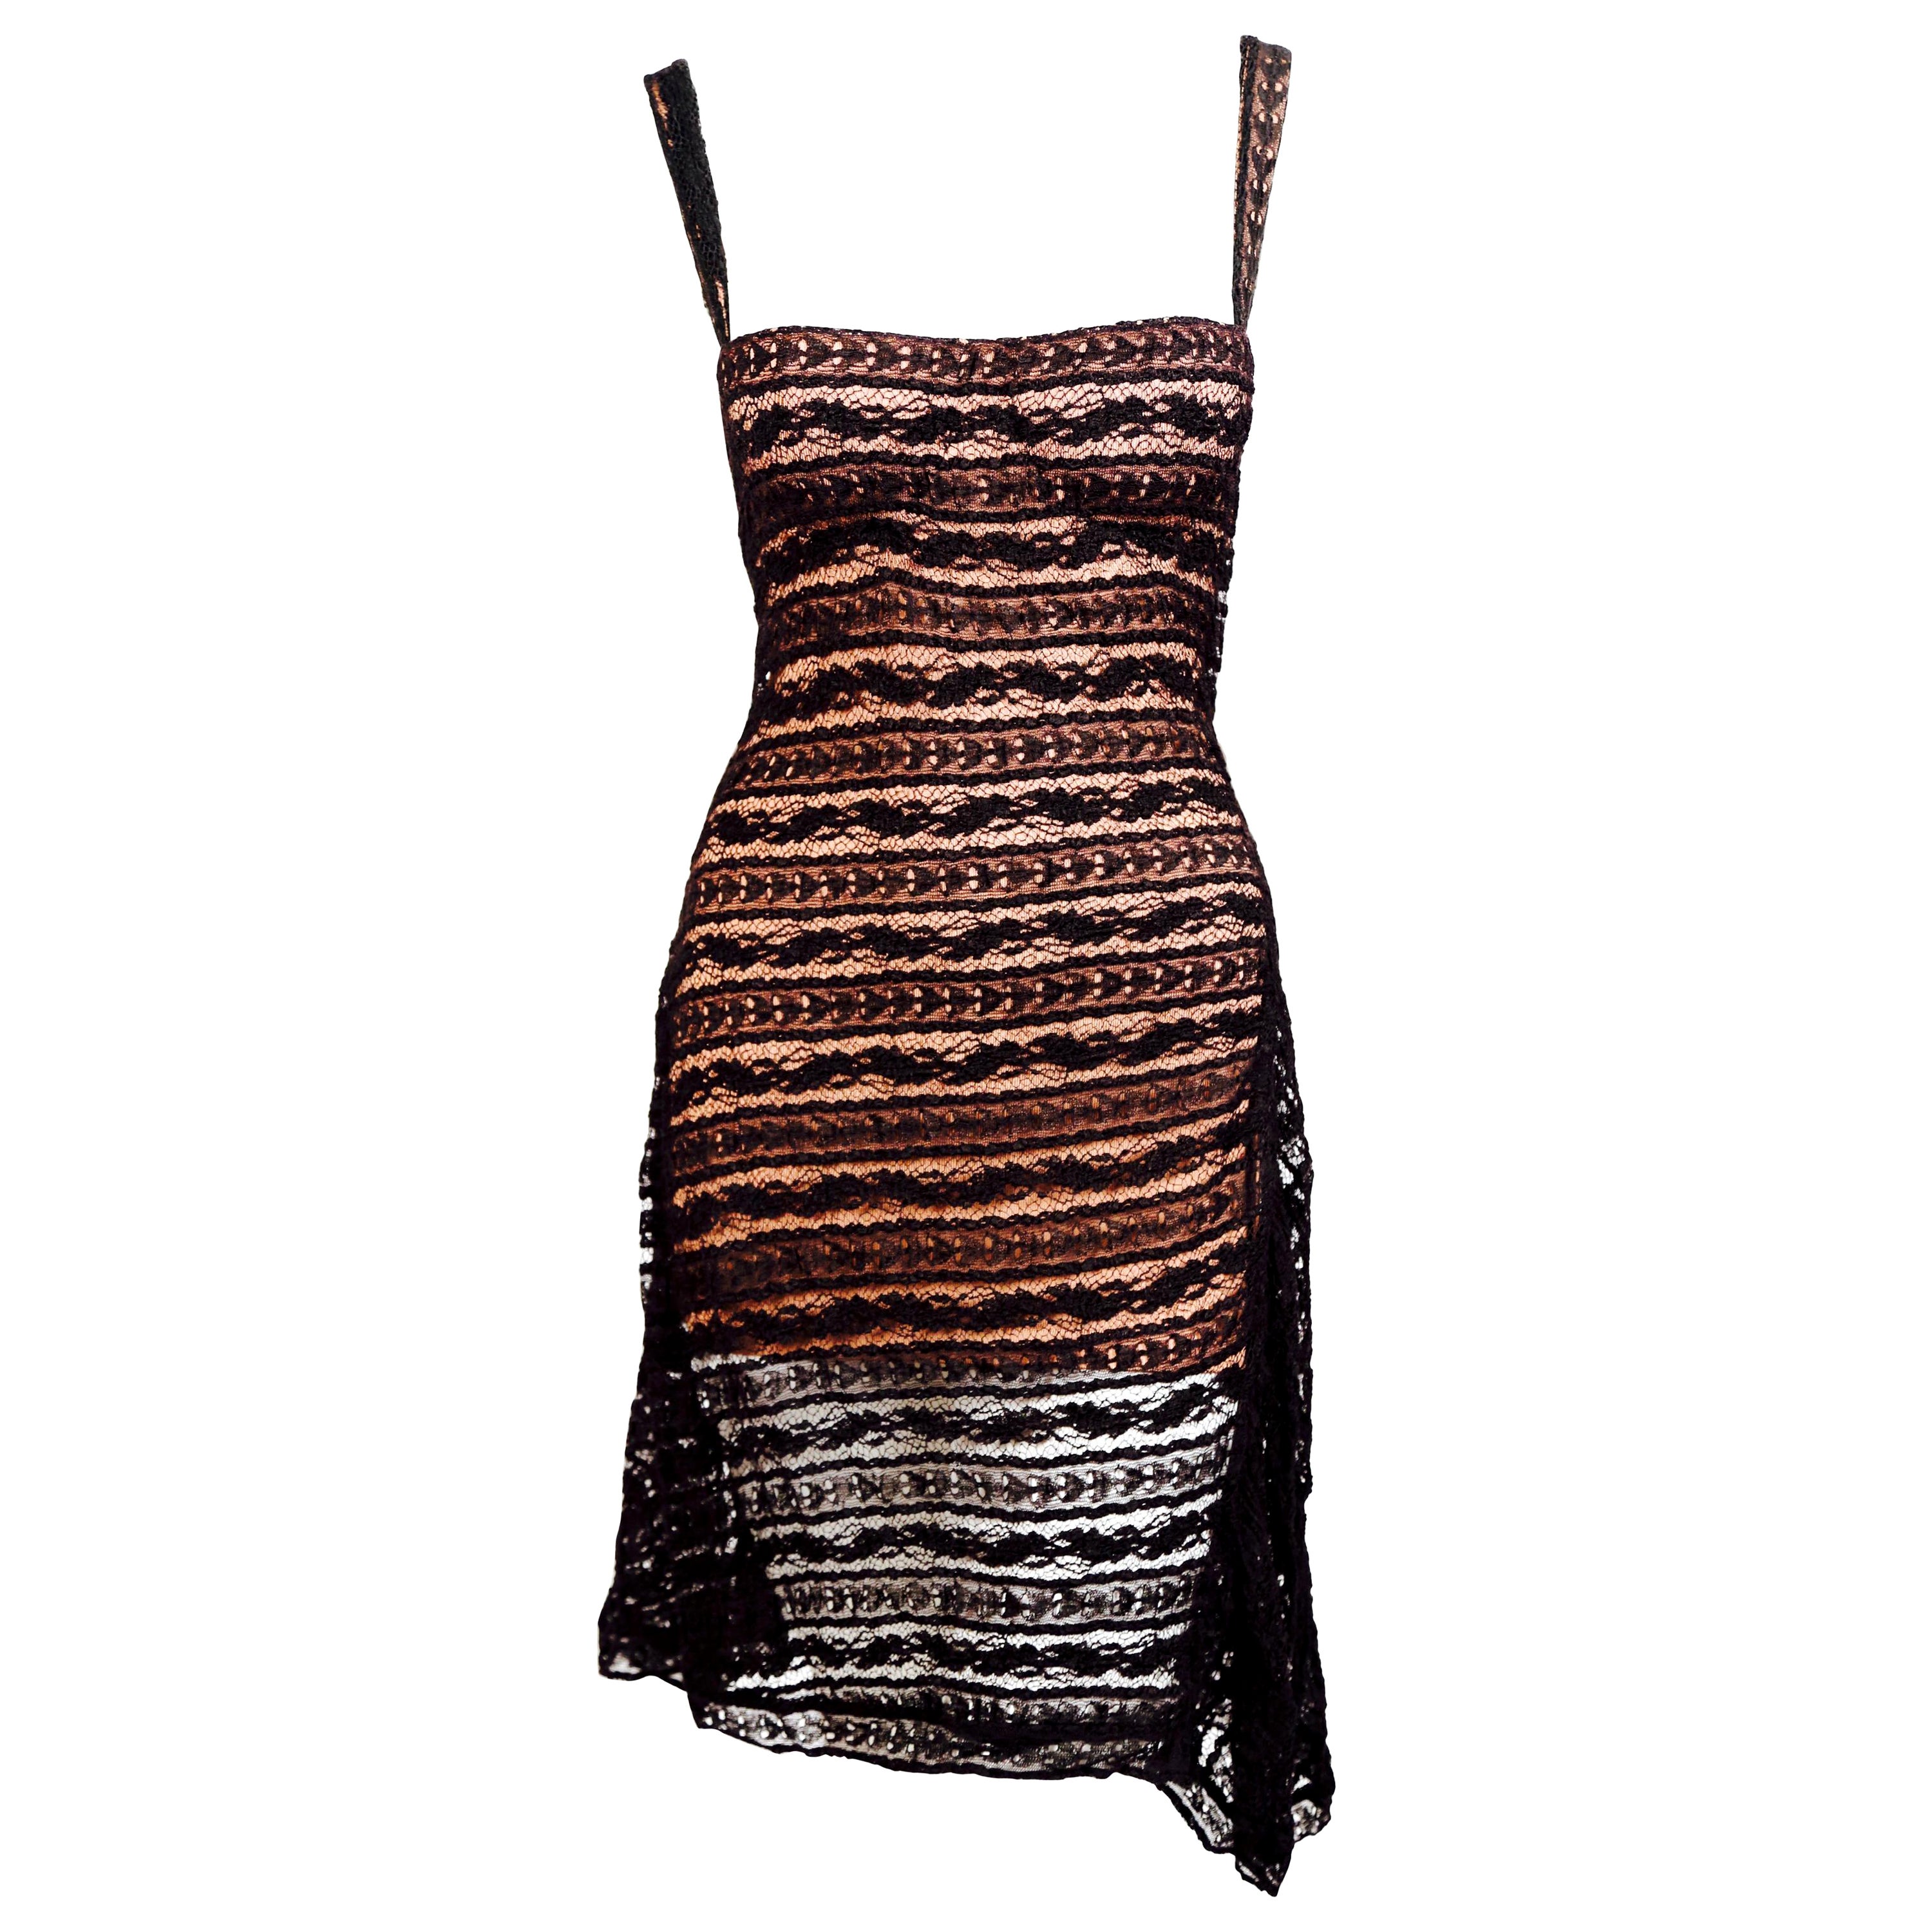 1993 AZZEDINE ALAIA black lace dress with molded bustier For Sale